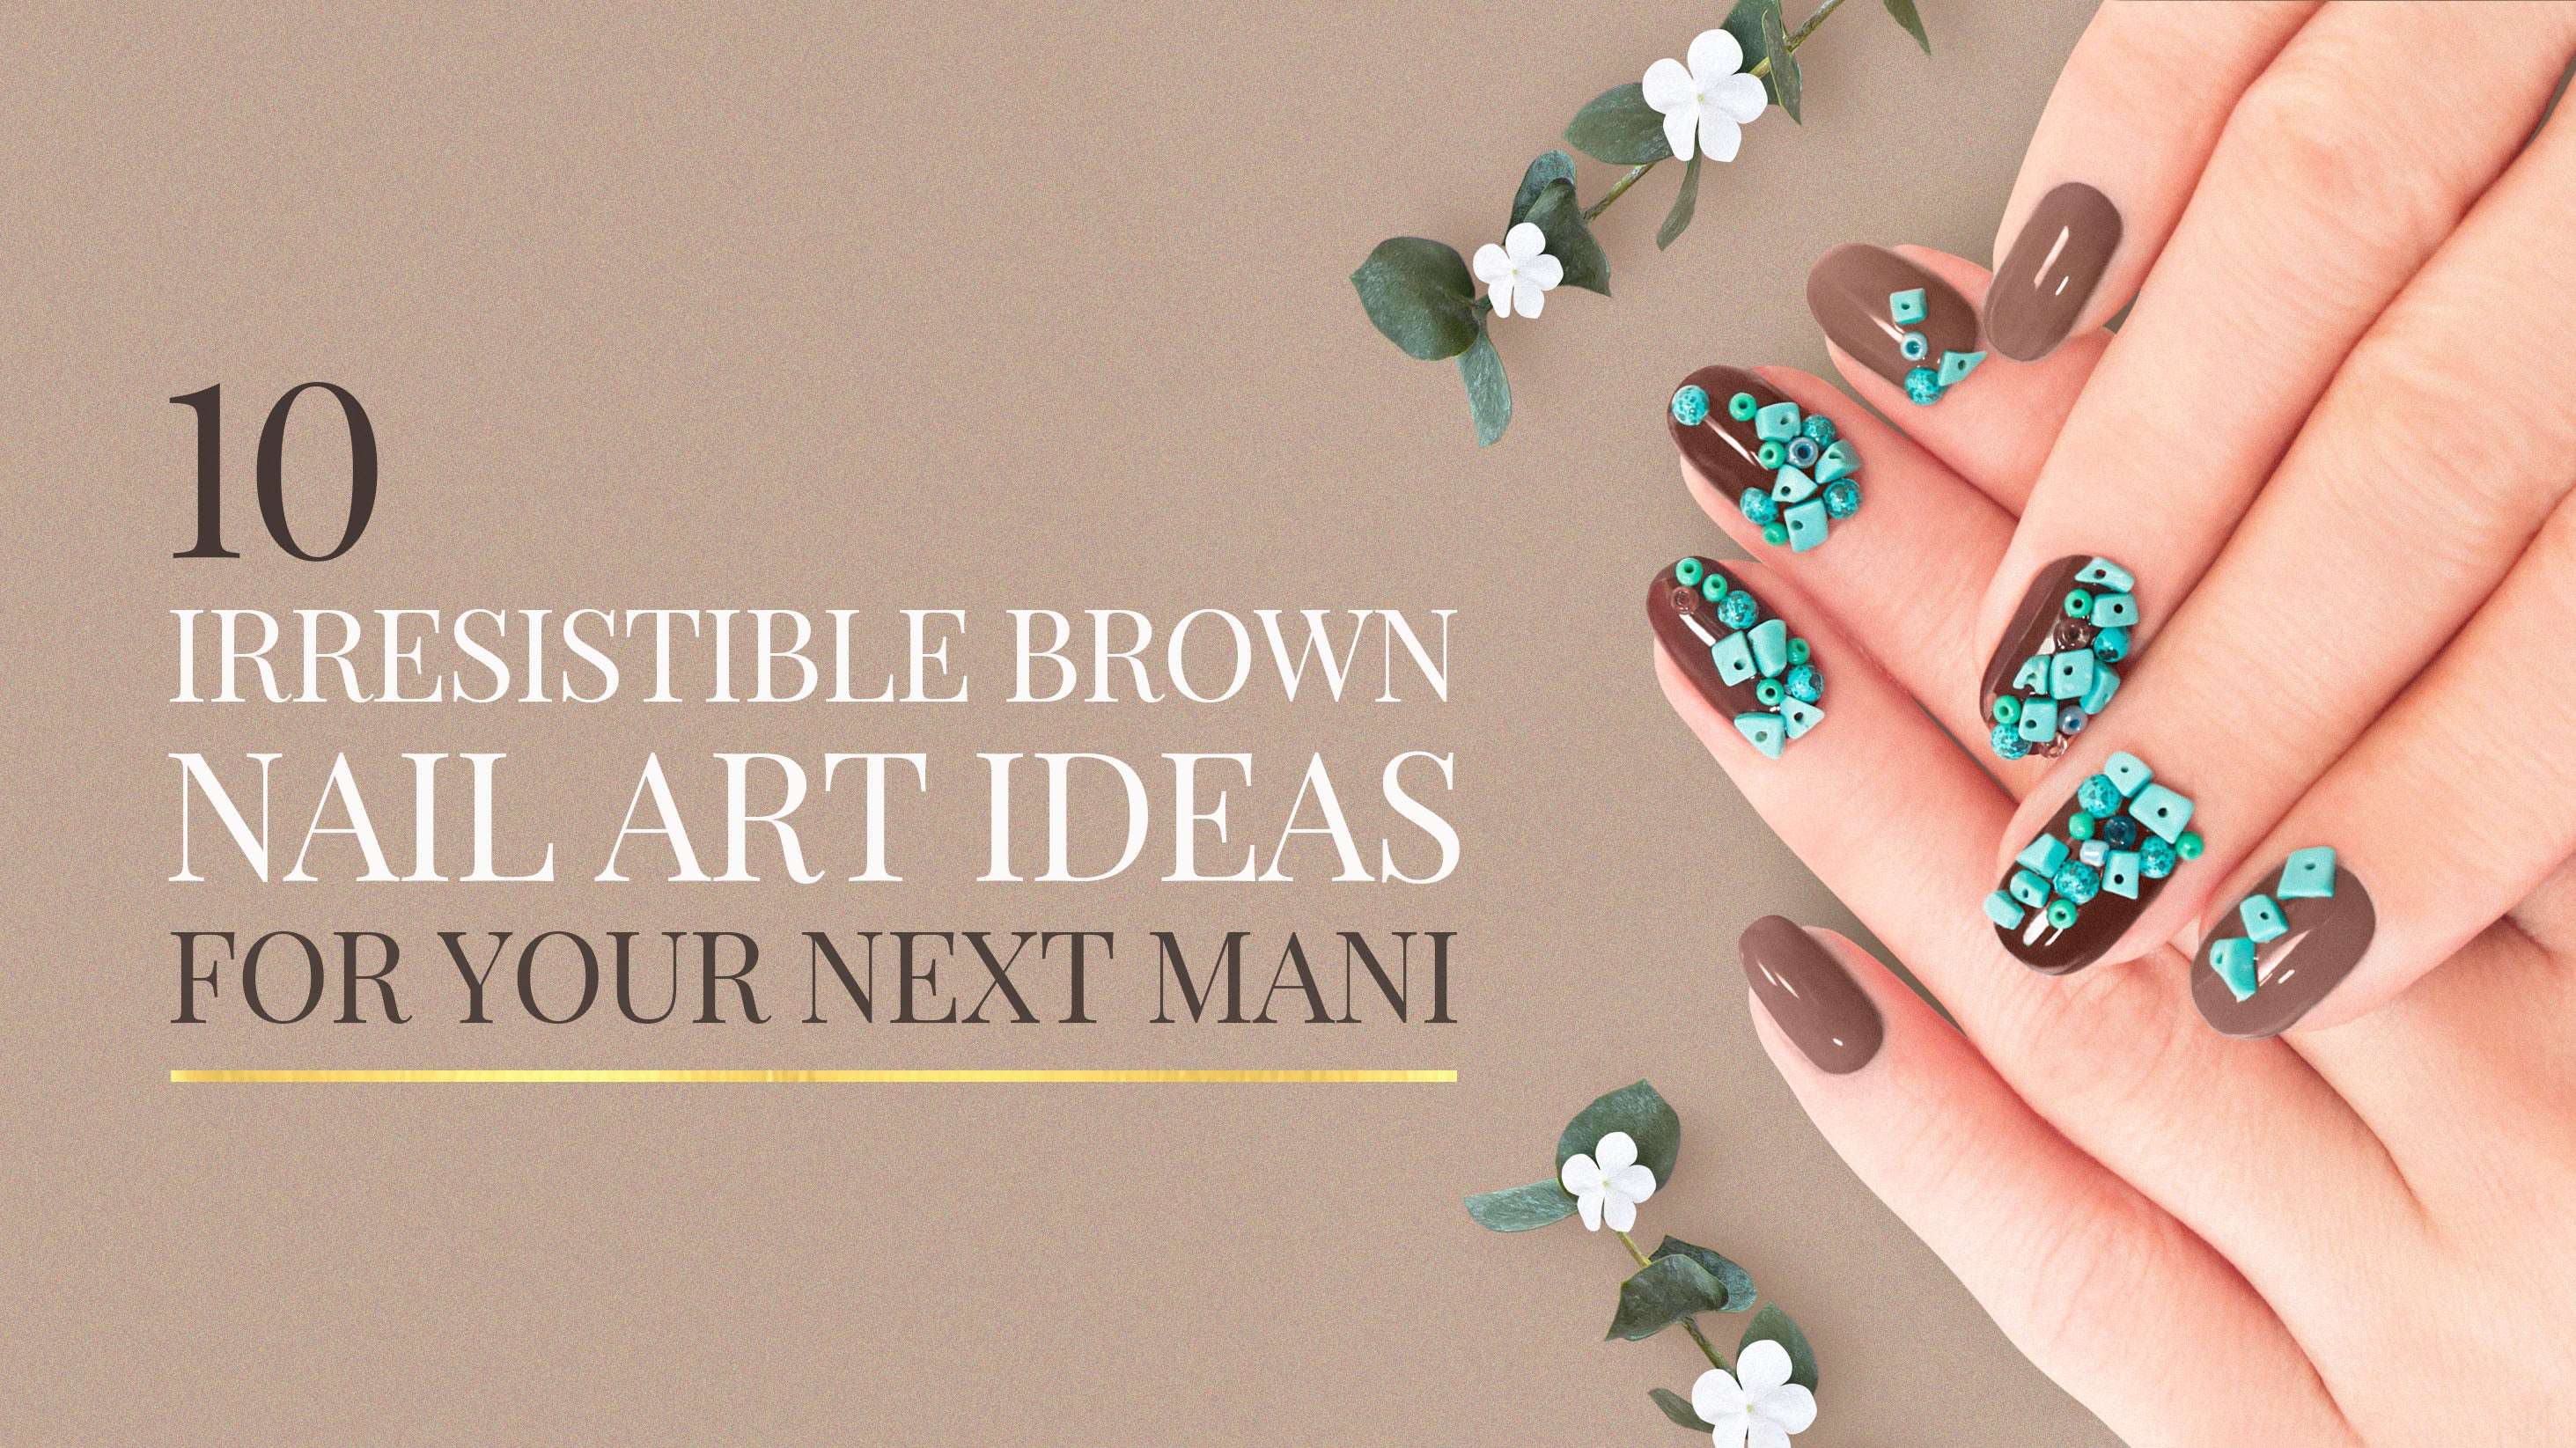 62 Dreamy Nail Designs To Take Your Nail Art To The Next Level